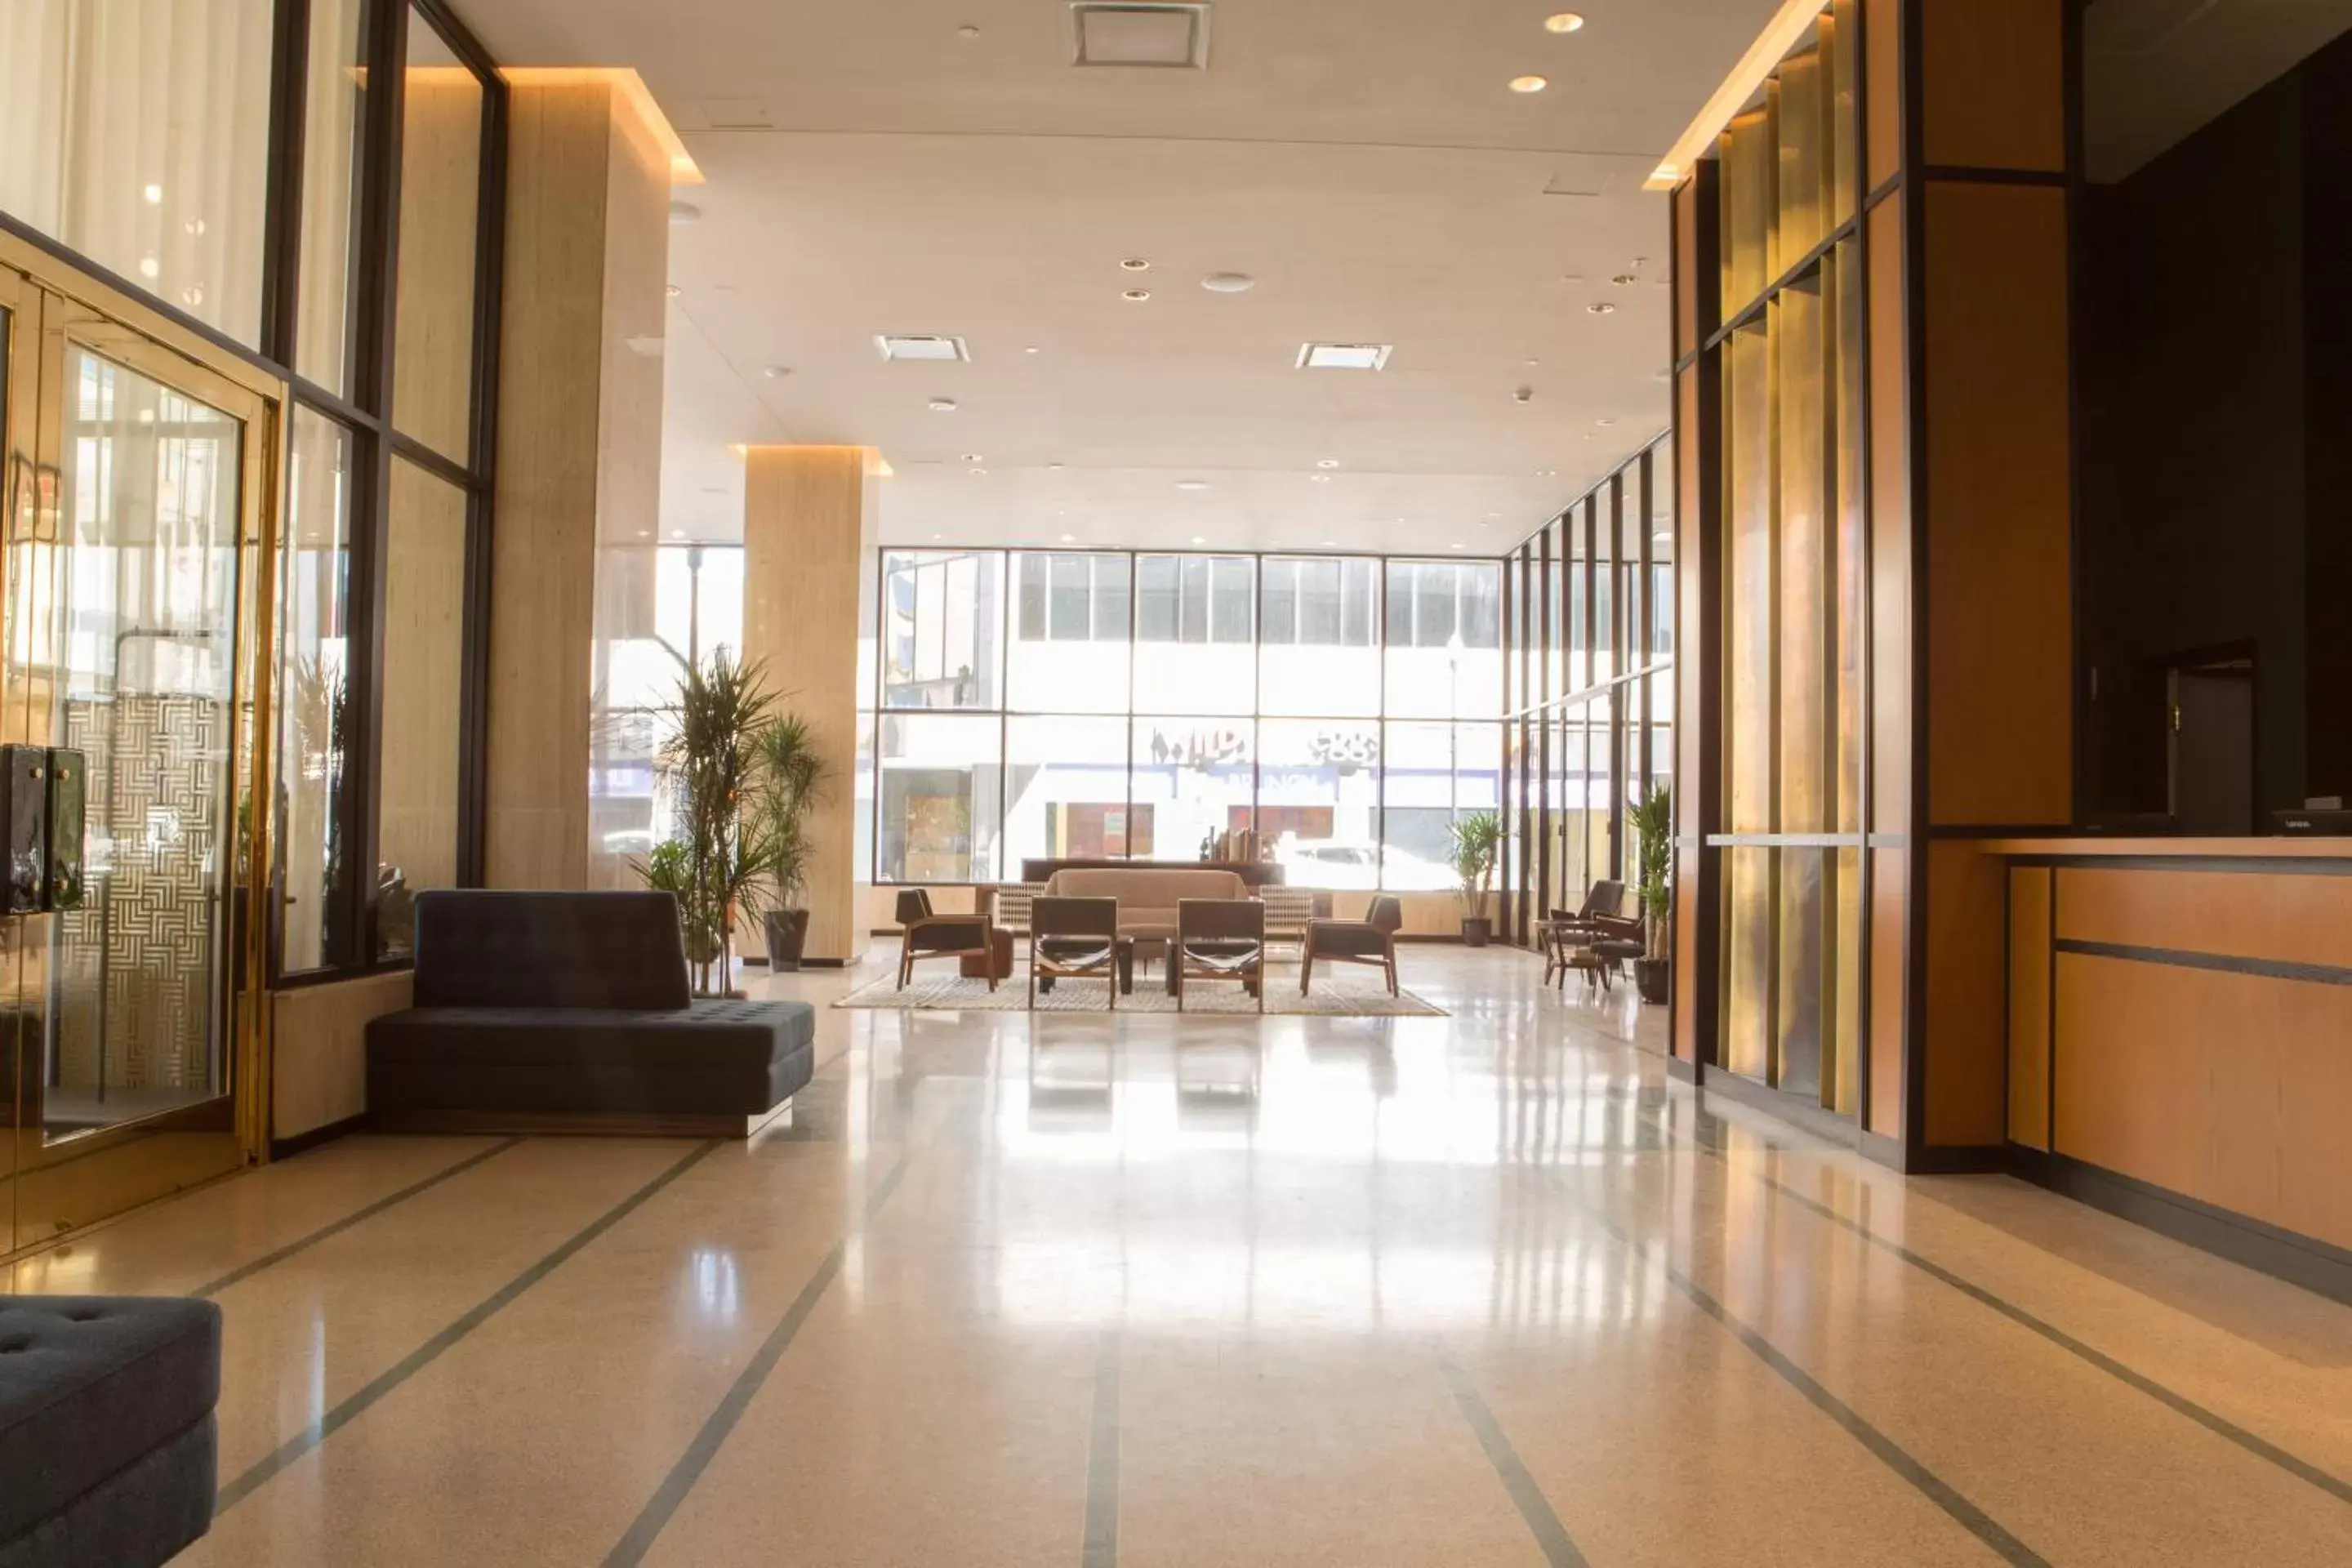 Lobby or reception in Fairlane Hotel Nashville, by Oliver